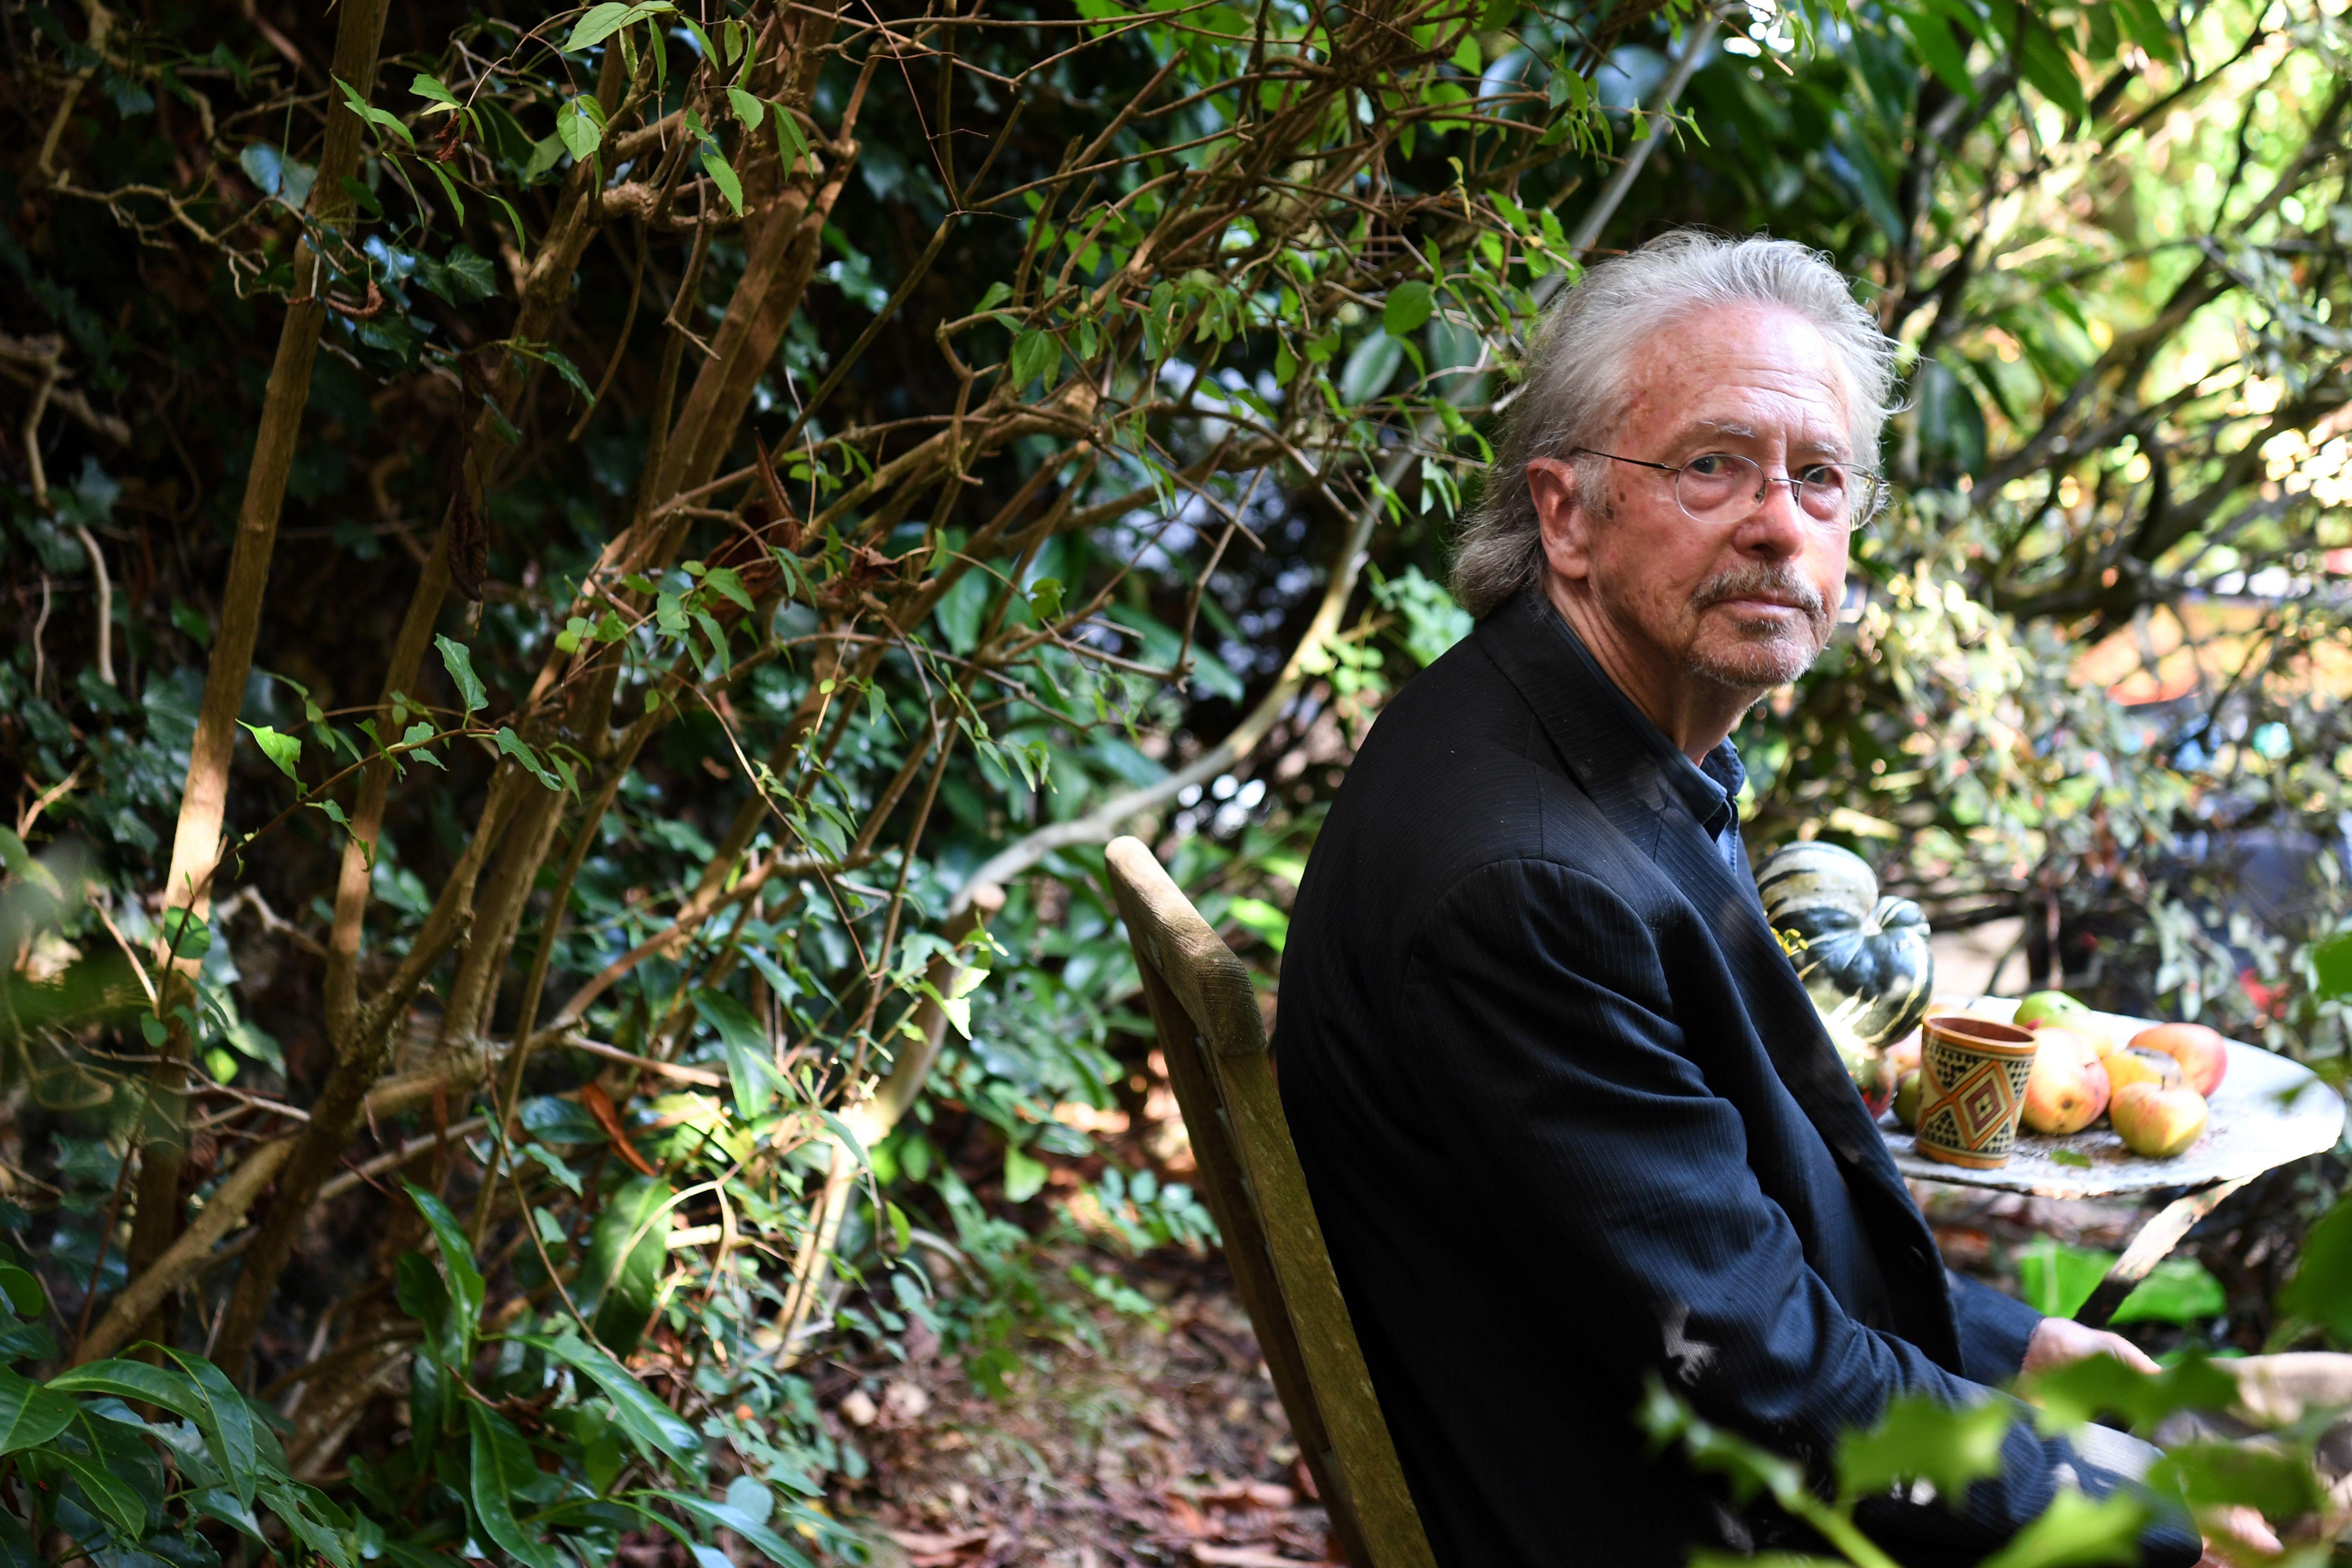 Peter Handke sits at a table with a mug and several apples against a backdrop of greenery.